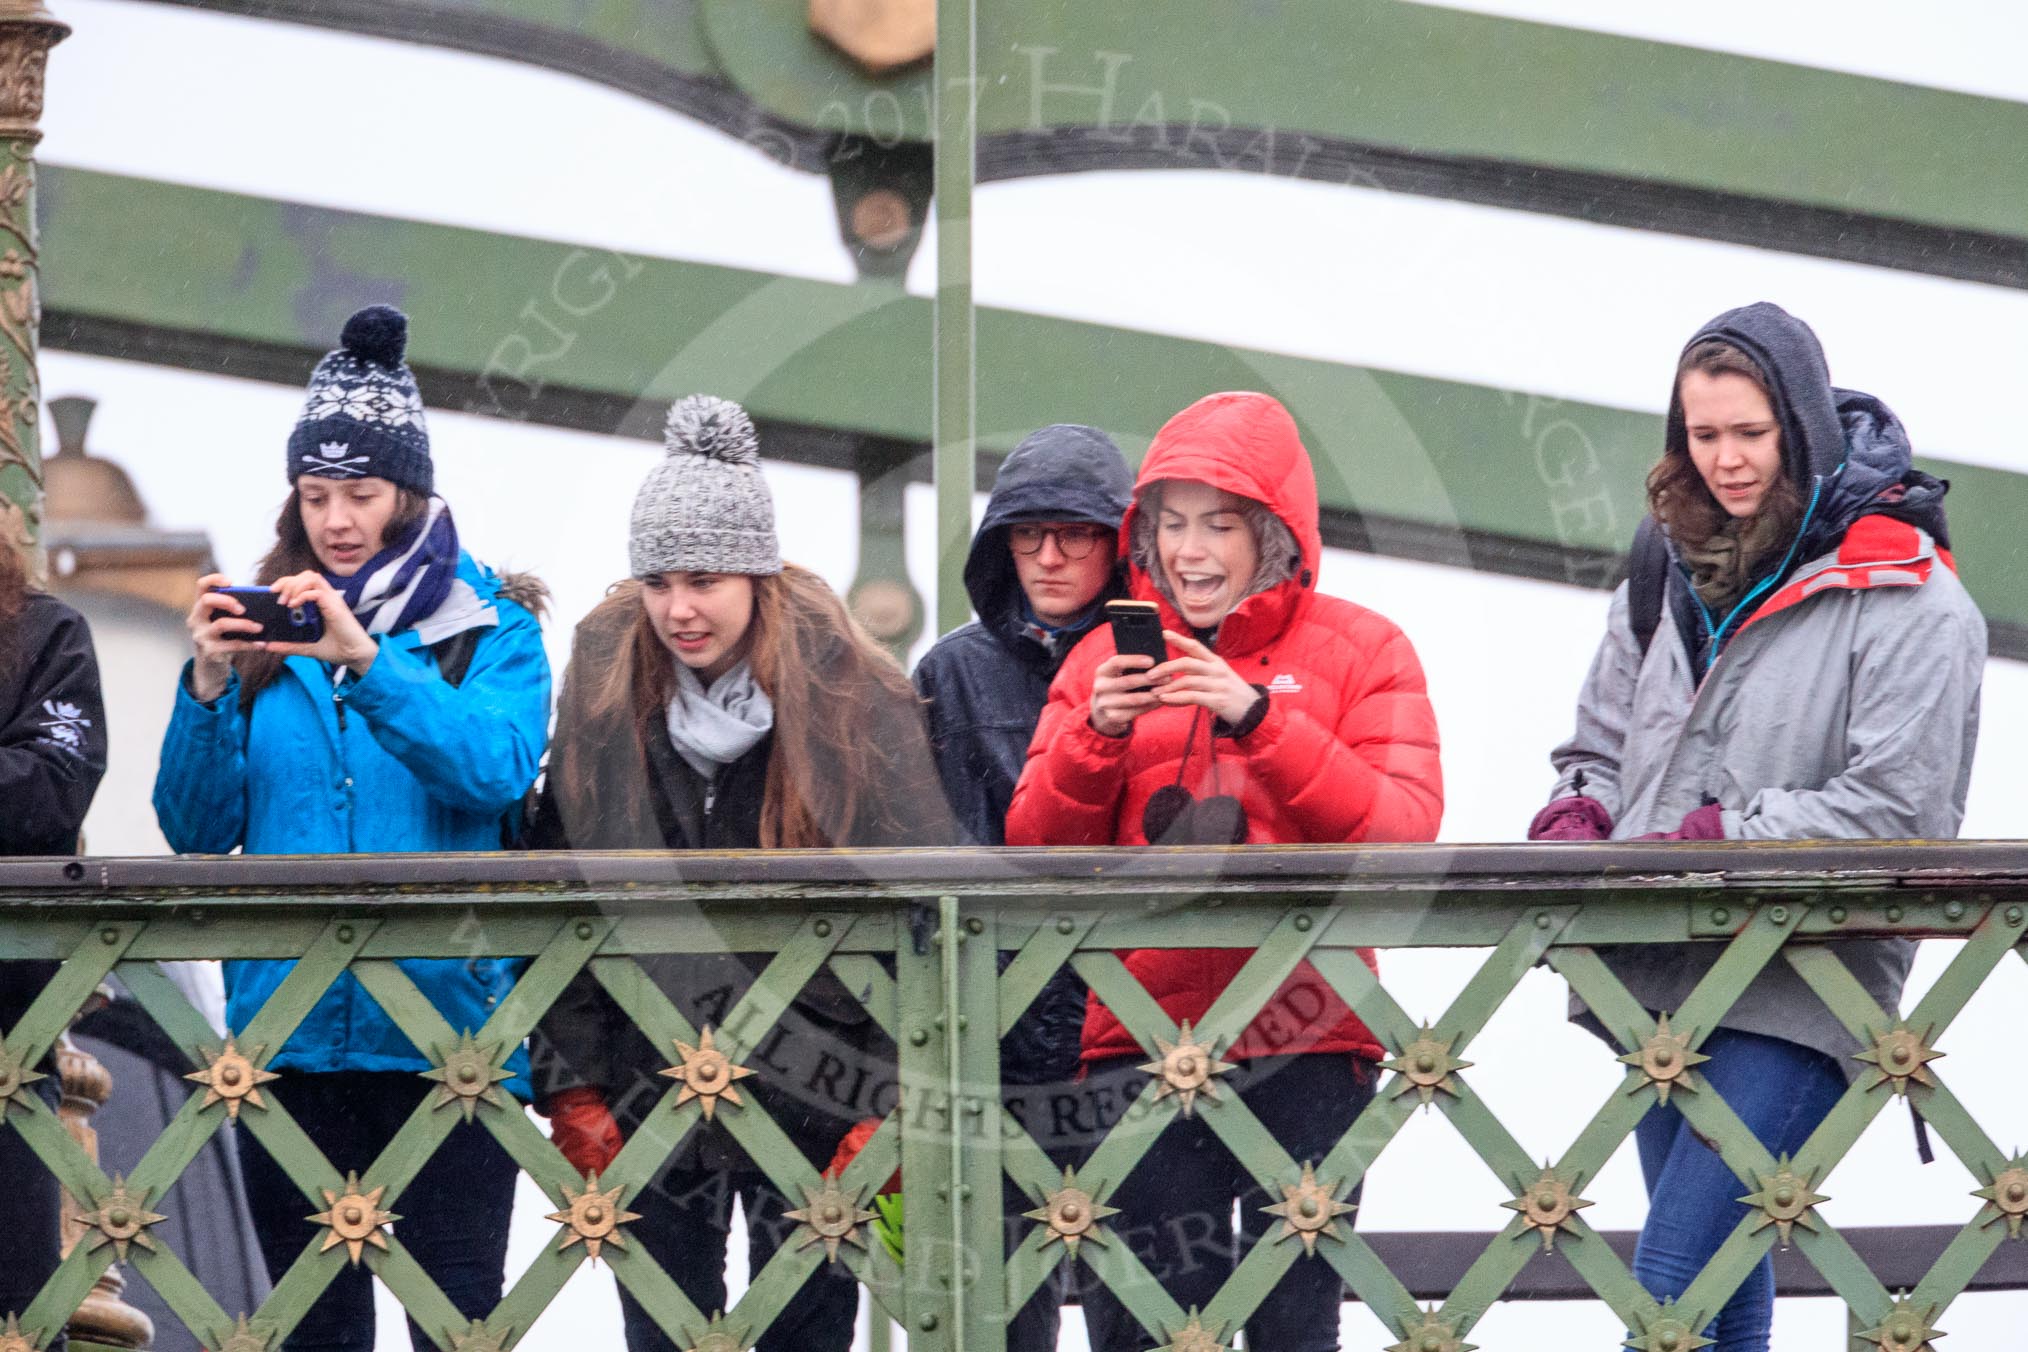 The Boat Race season 2018 - Women's Boat Race Trial Eights (OUWBC, Oxford): friends and families on Hammersmith Bridge.
River Thames between Putney Bridge and Mortlake,
London SW15,

United Kingdom,
on 21 January 2018 at 14:35, image #98